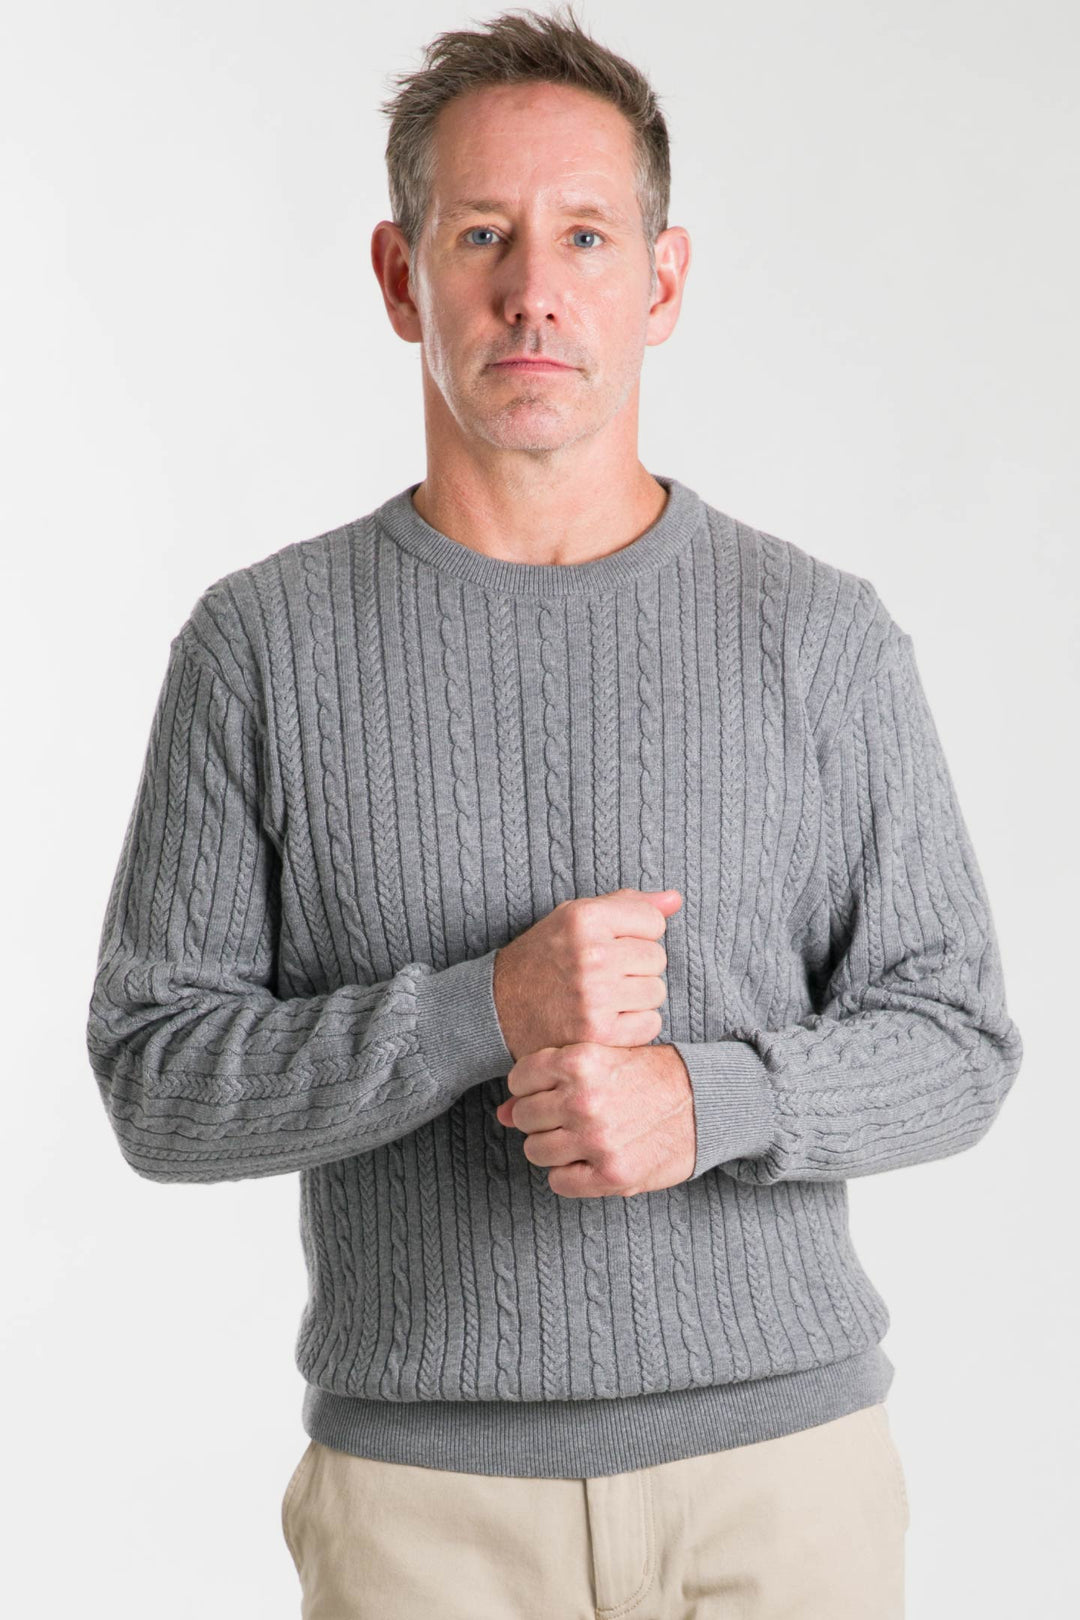 Buy Grey Cable Knit Sweater for Short Men | Ash & Erie   Sweater